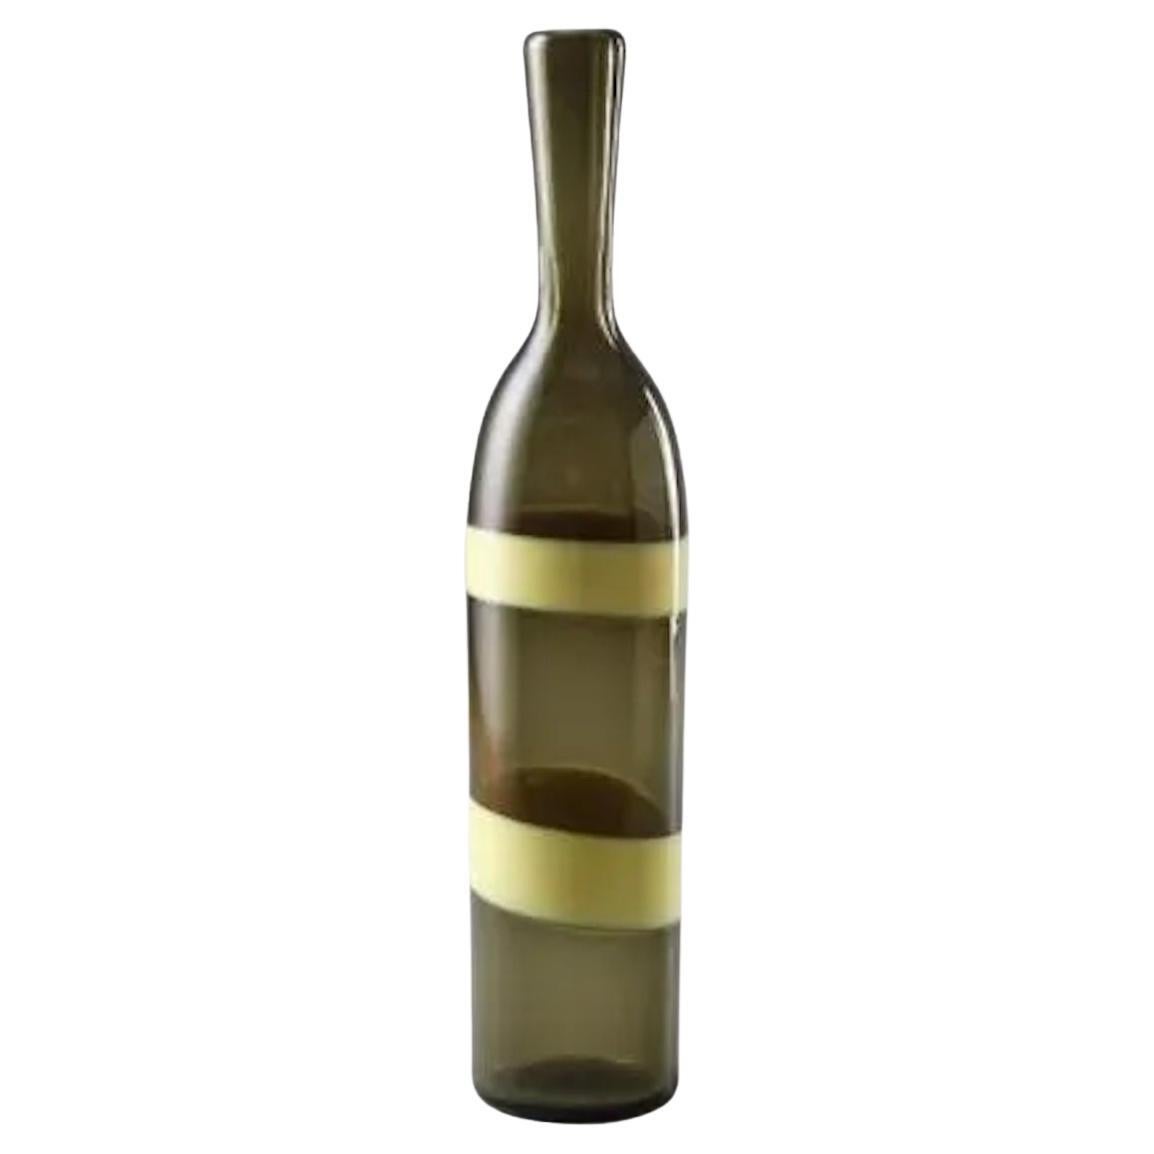 Yellow and Green Glass Bottle by Fulvio Bianconi for Venini.